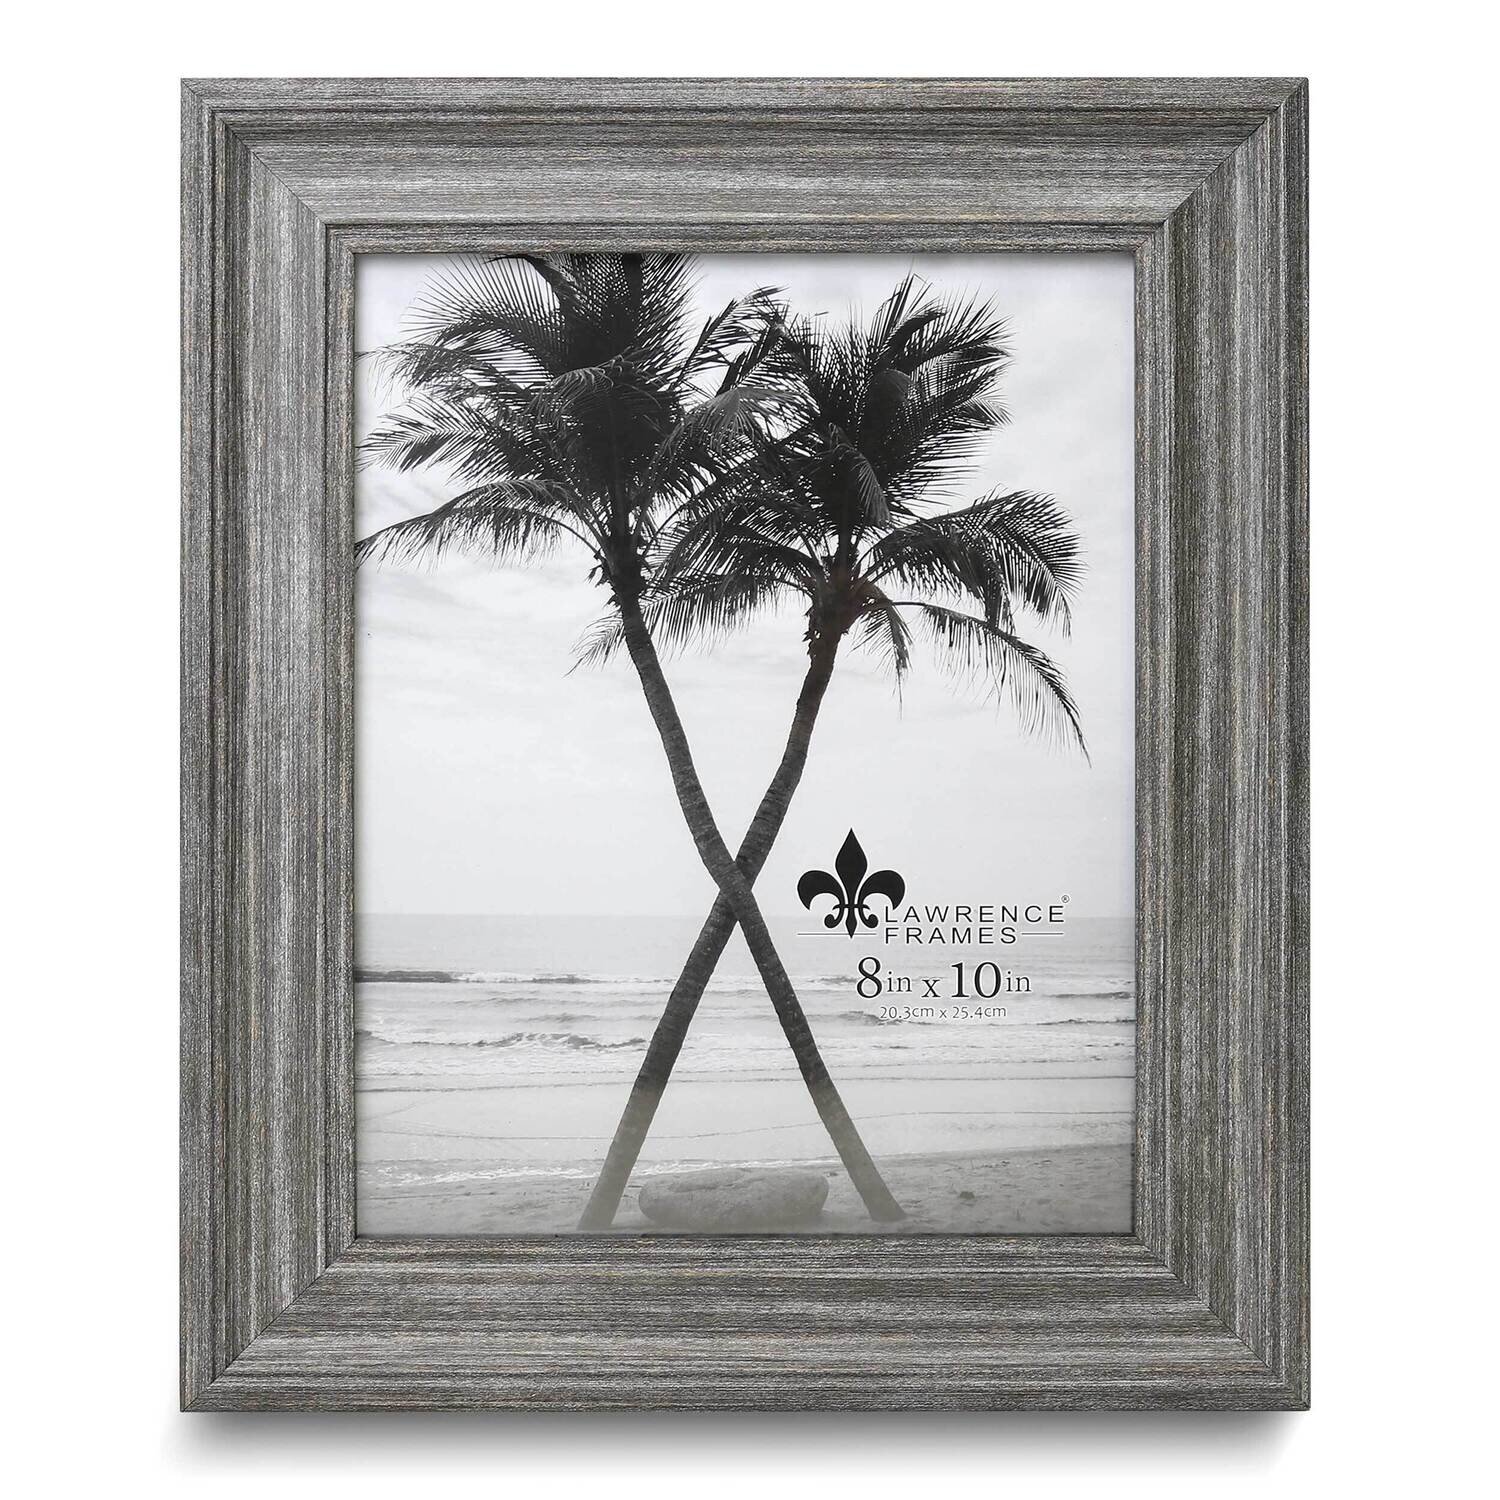 Marlo Antique Finish Gray 8 x 10 Inch Photo Picture Frame GM25507